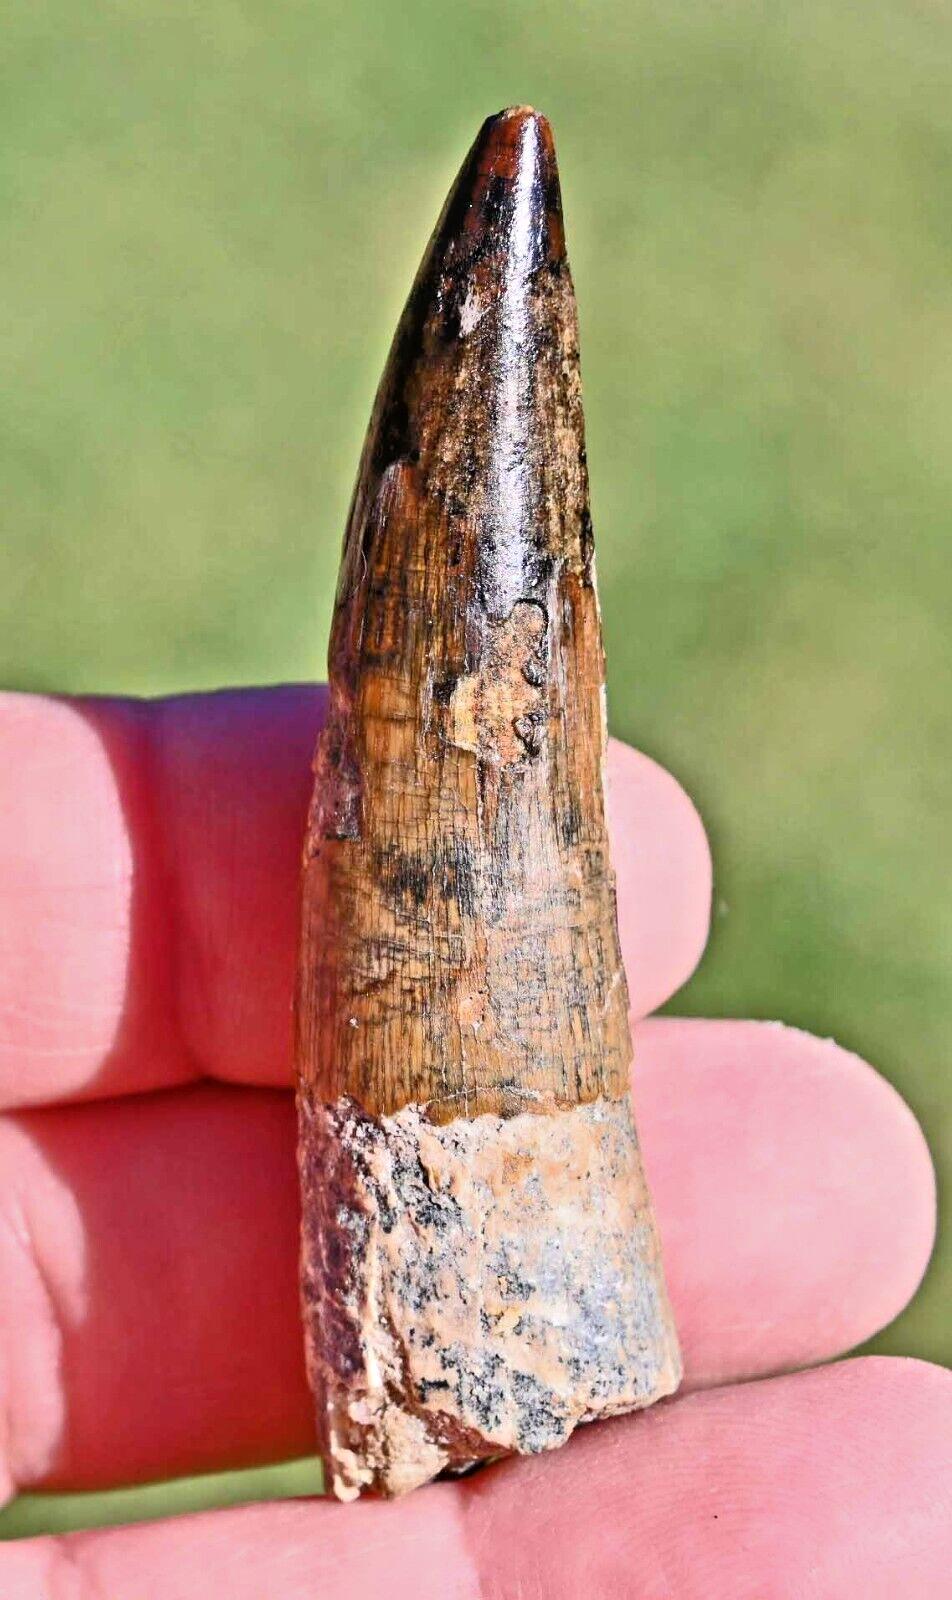 Spinosaurus tooth 2.88 inches, from Morocco